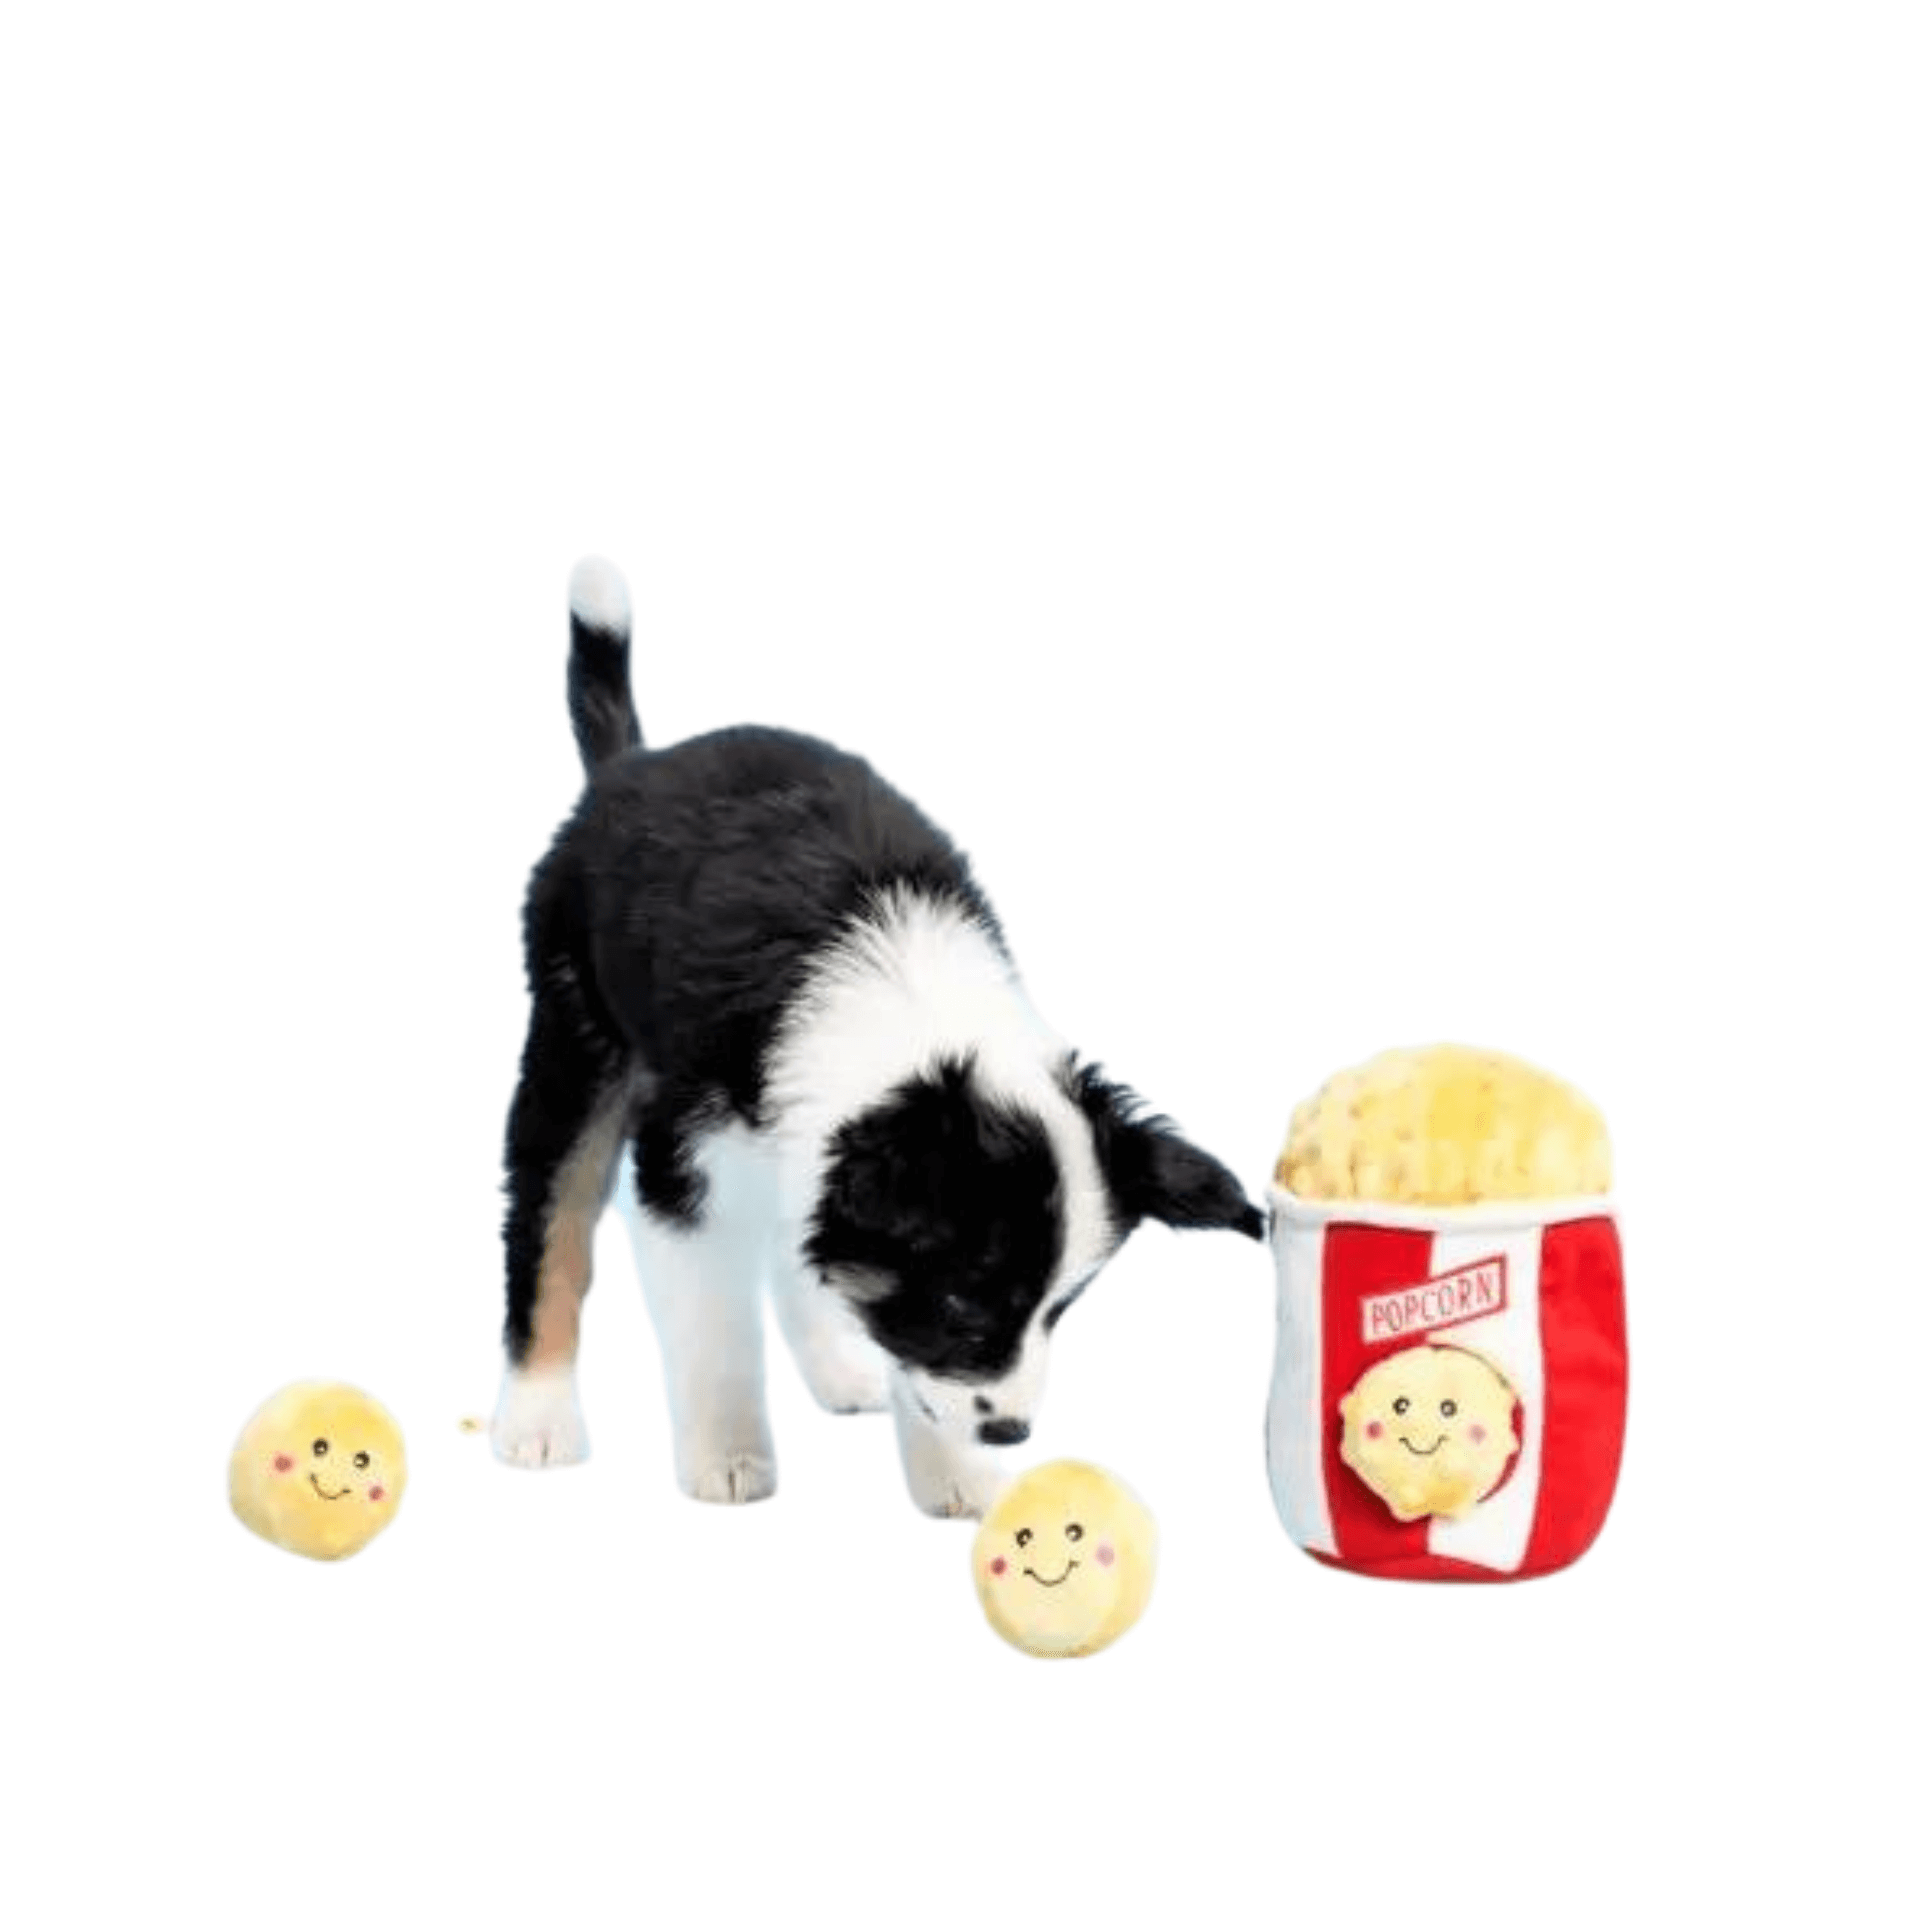 Interactive dog toy puzzle popcorn bucket with popcorn balls, let's pawty